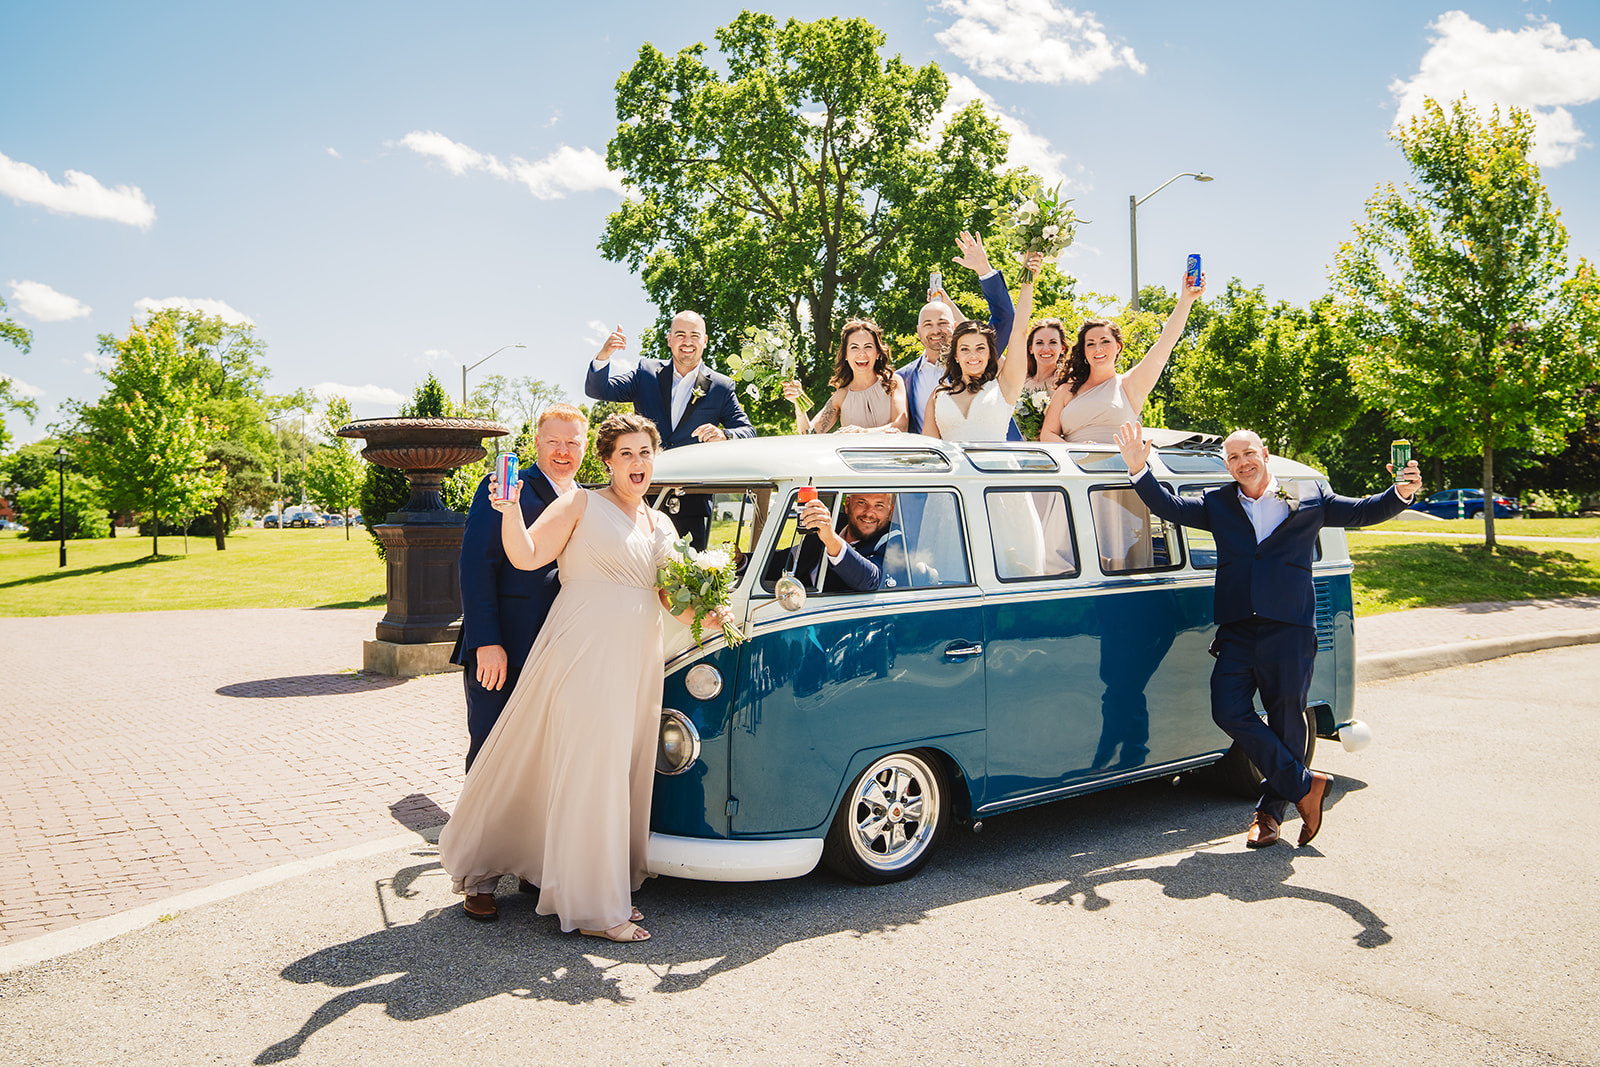 VW wagon transports bridal party to ceremony